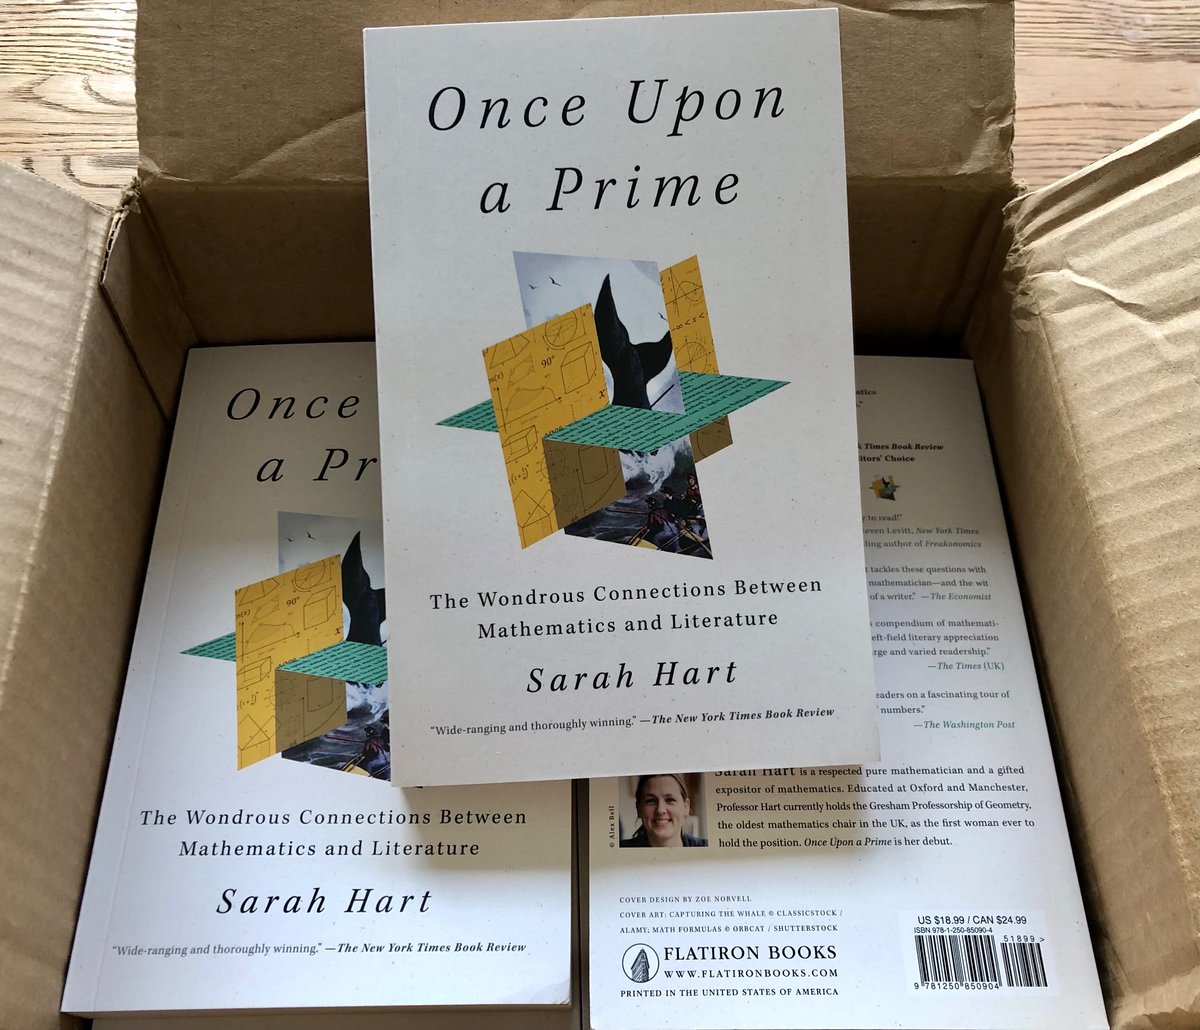 The U.S. paperback of Once Upon A Prime just arrived! Thank you @Flatironbooks, it looks great!